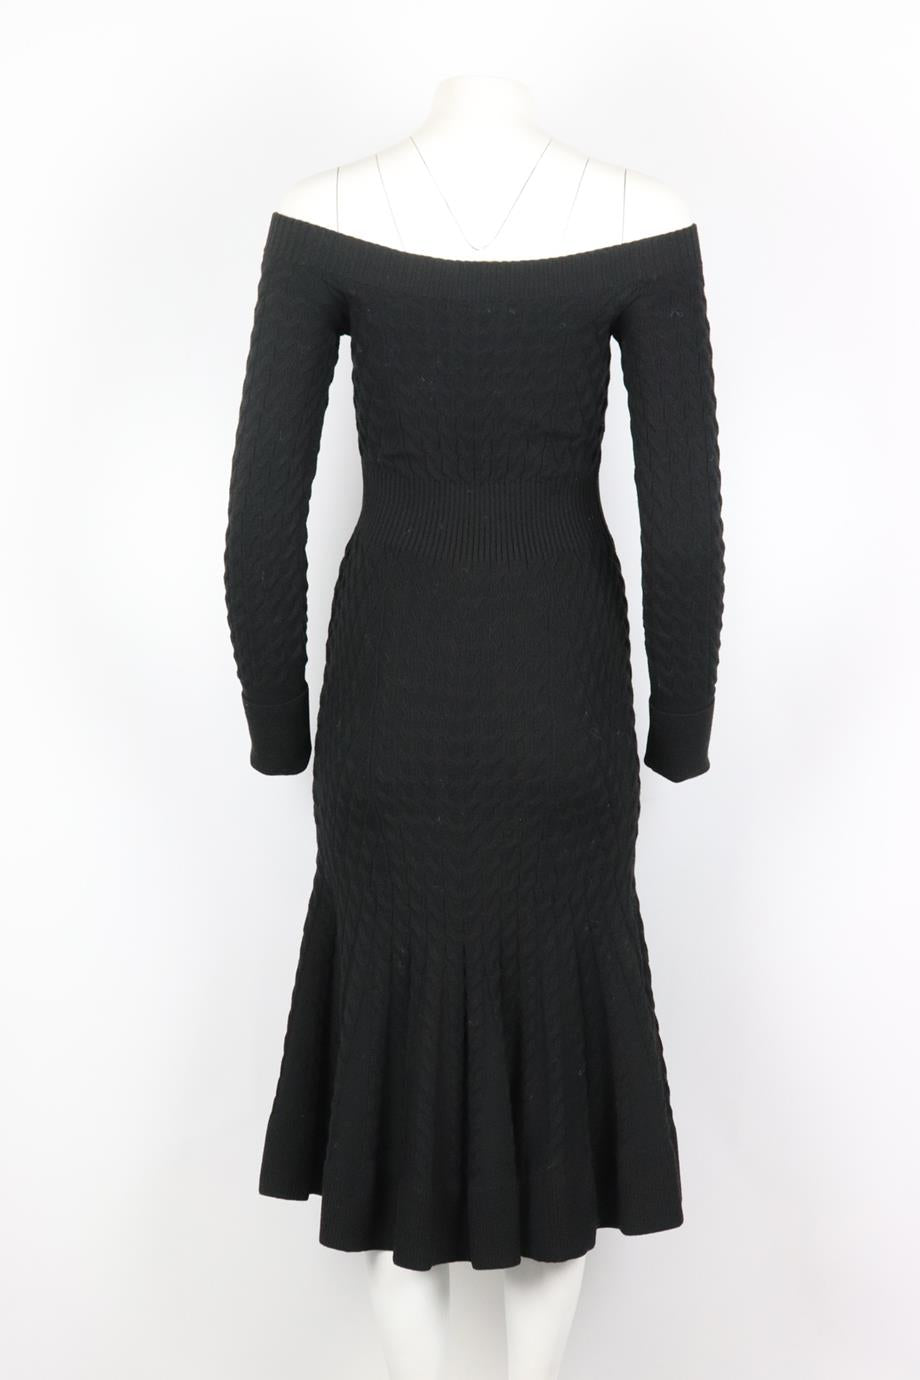 ALEXANDER MCQUEEN OFF THE SHOULDER CABLE KNIT WOOL BLEND MIDI DRESS IT 42 UK 10